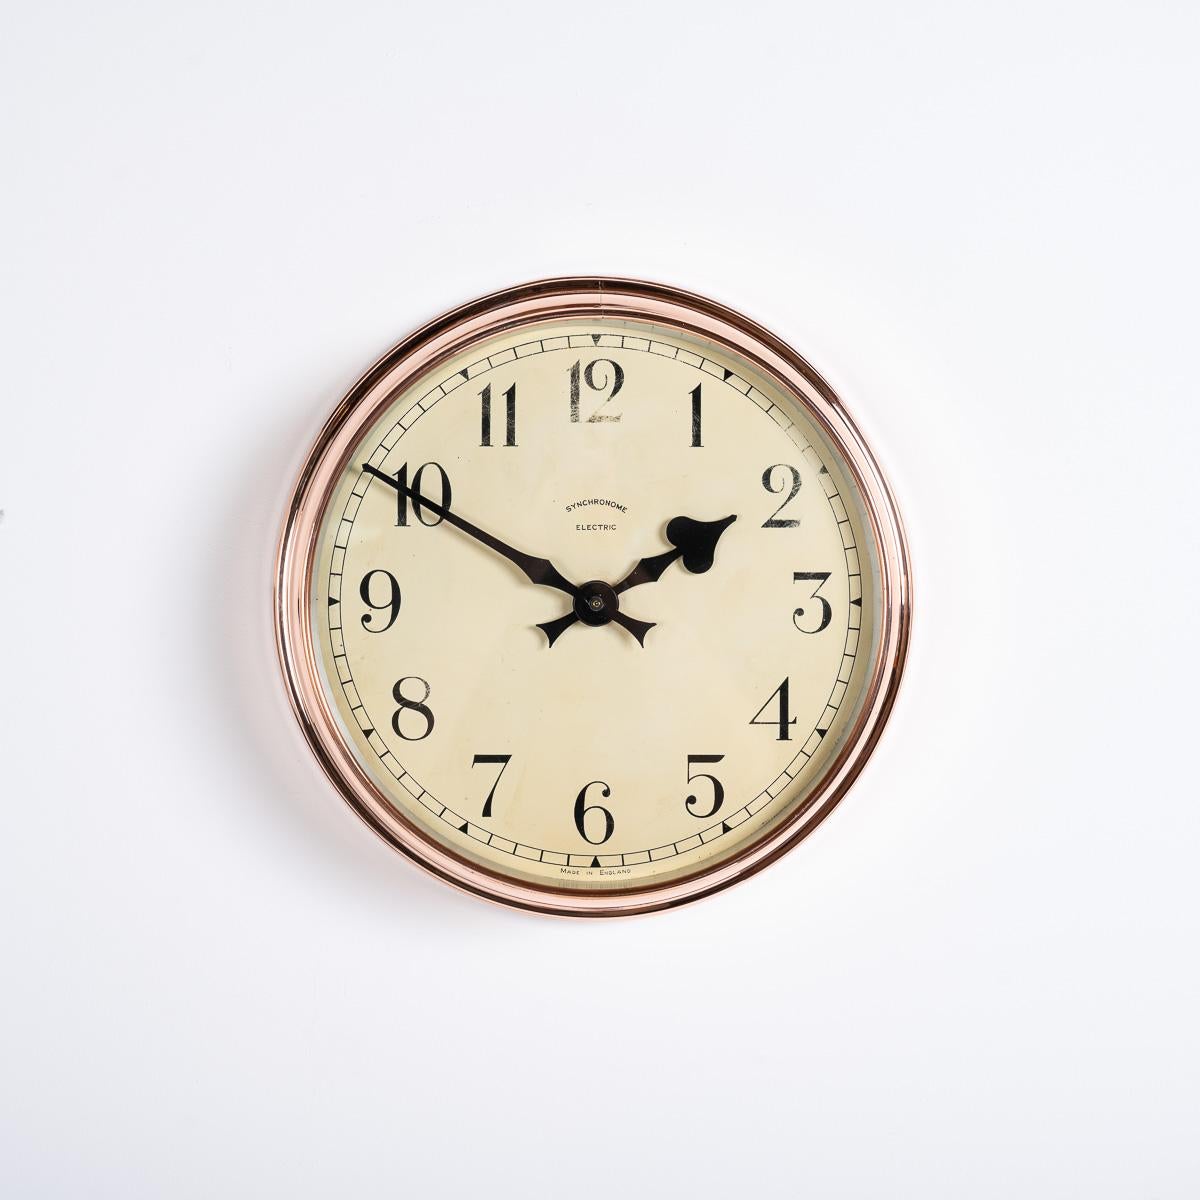 Vintage Industrial Polished Copper Case Wall Clock By Synchronome 7